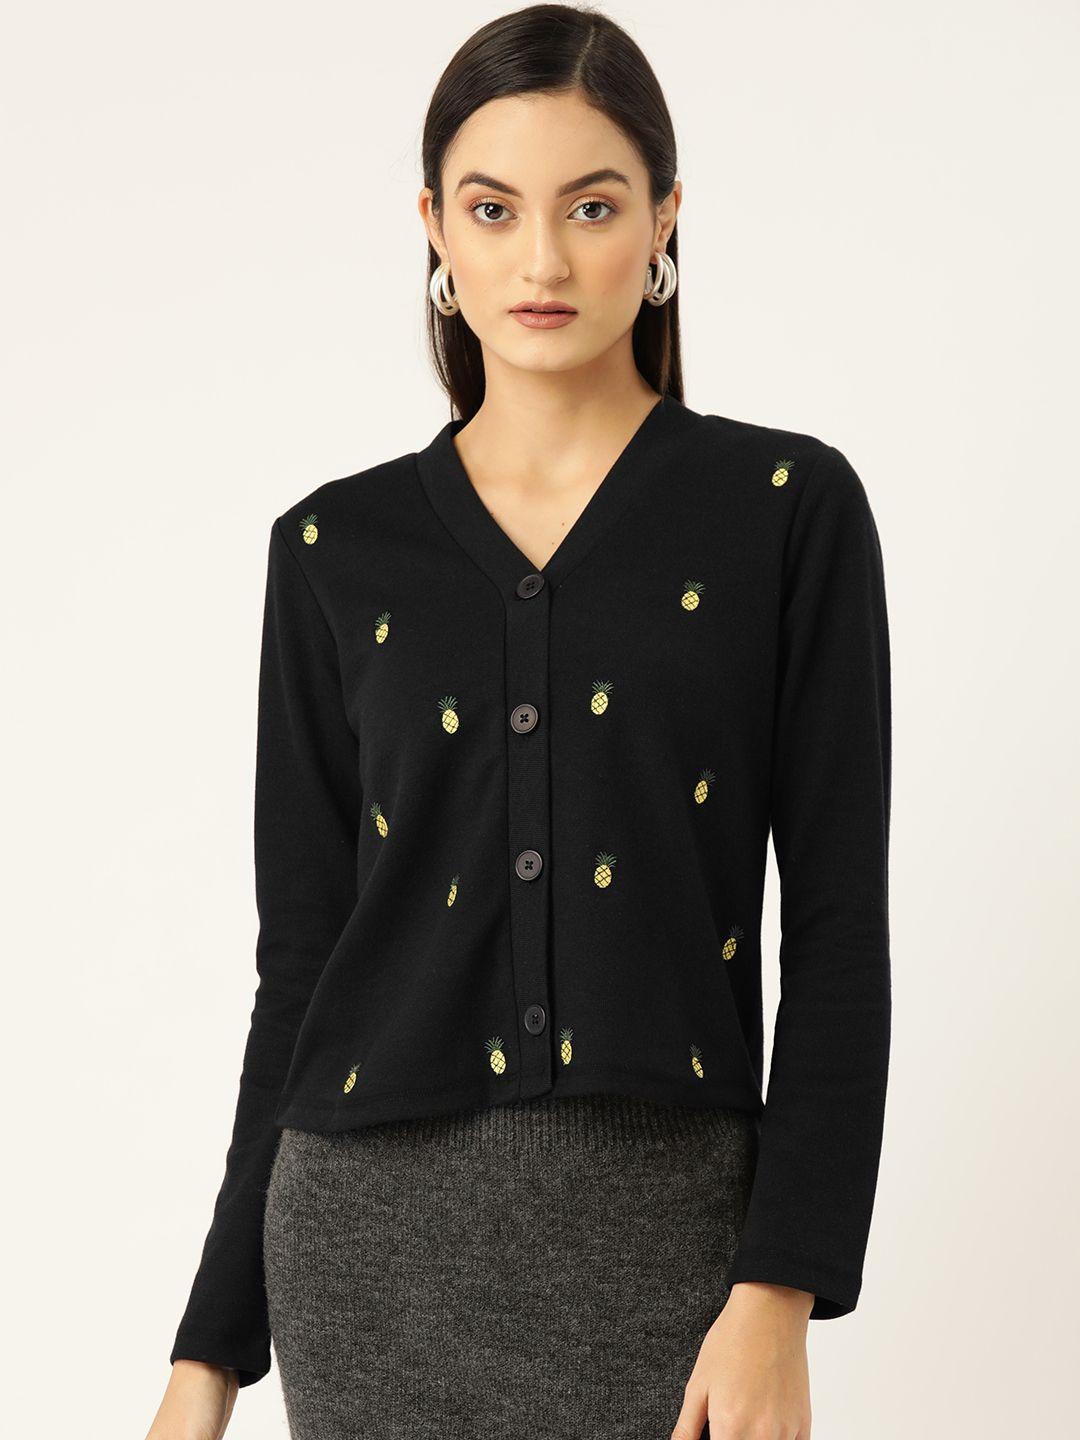 kassually women black pineapple embroidered cardigan sweater